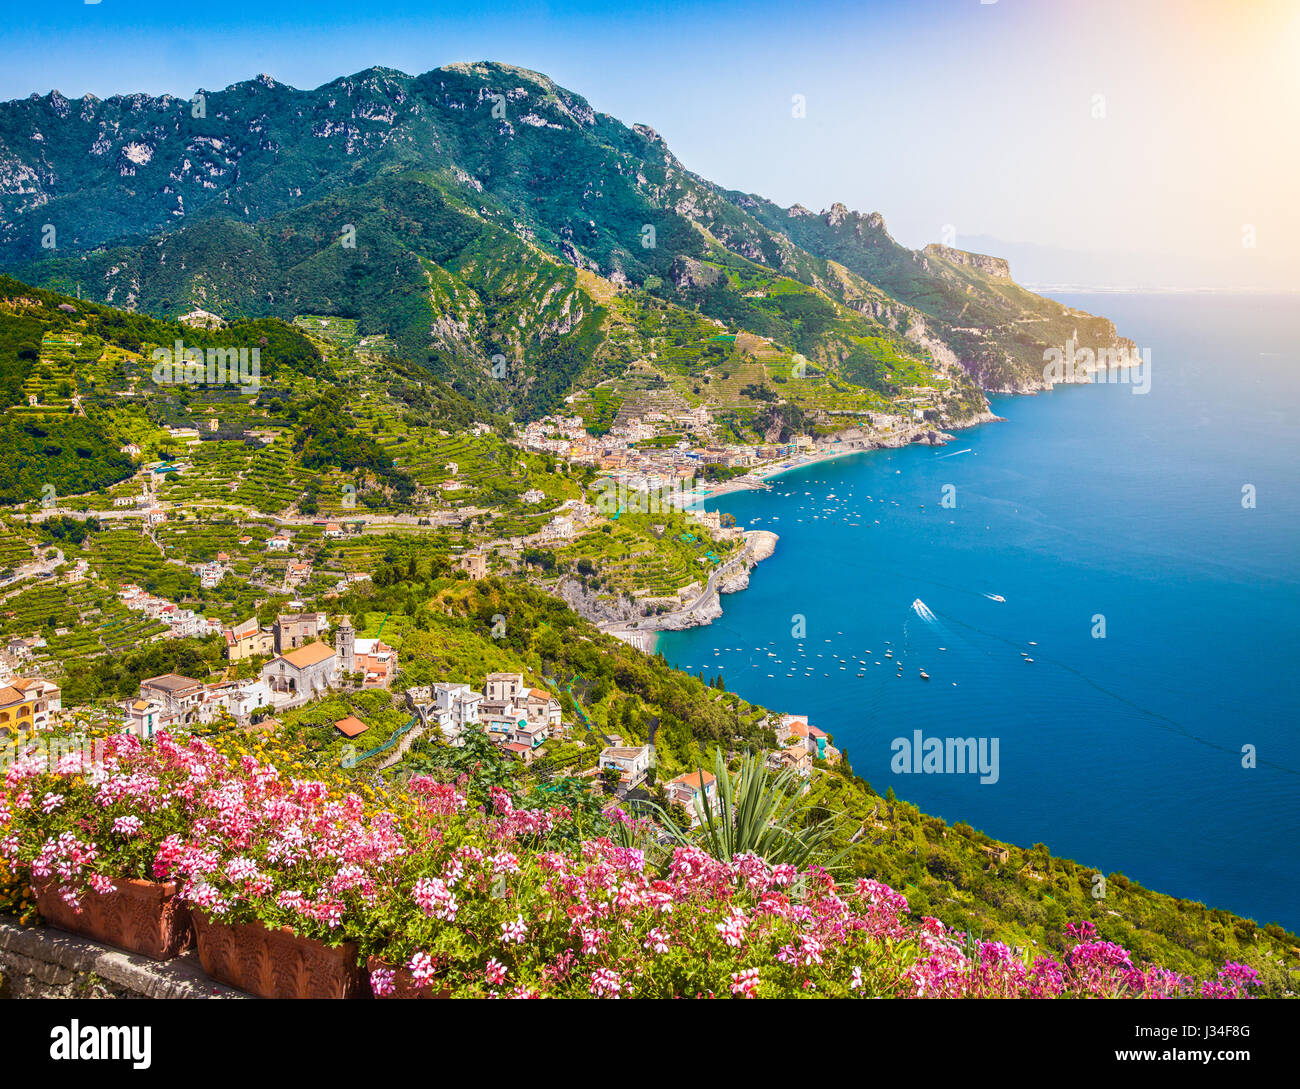 Scenic picture-postcard view of the beautiful Amalfi Coast with Gulf of Salerno, Campania, Italy Stock Photo